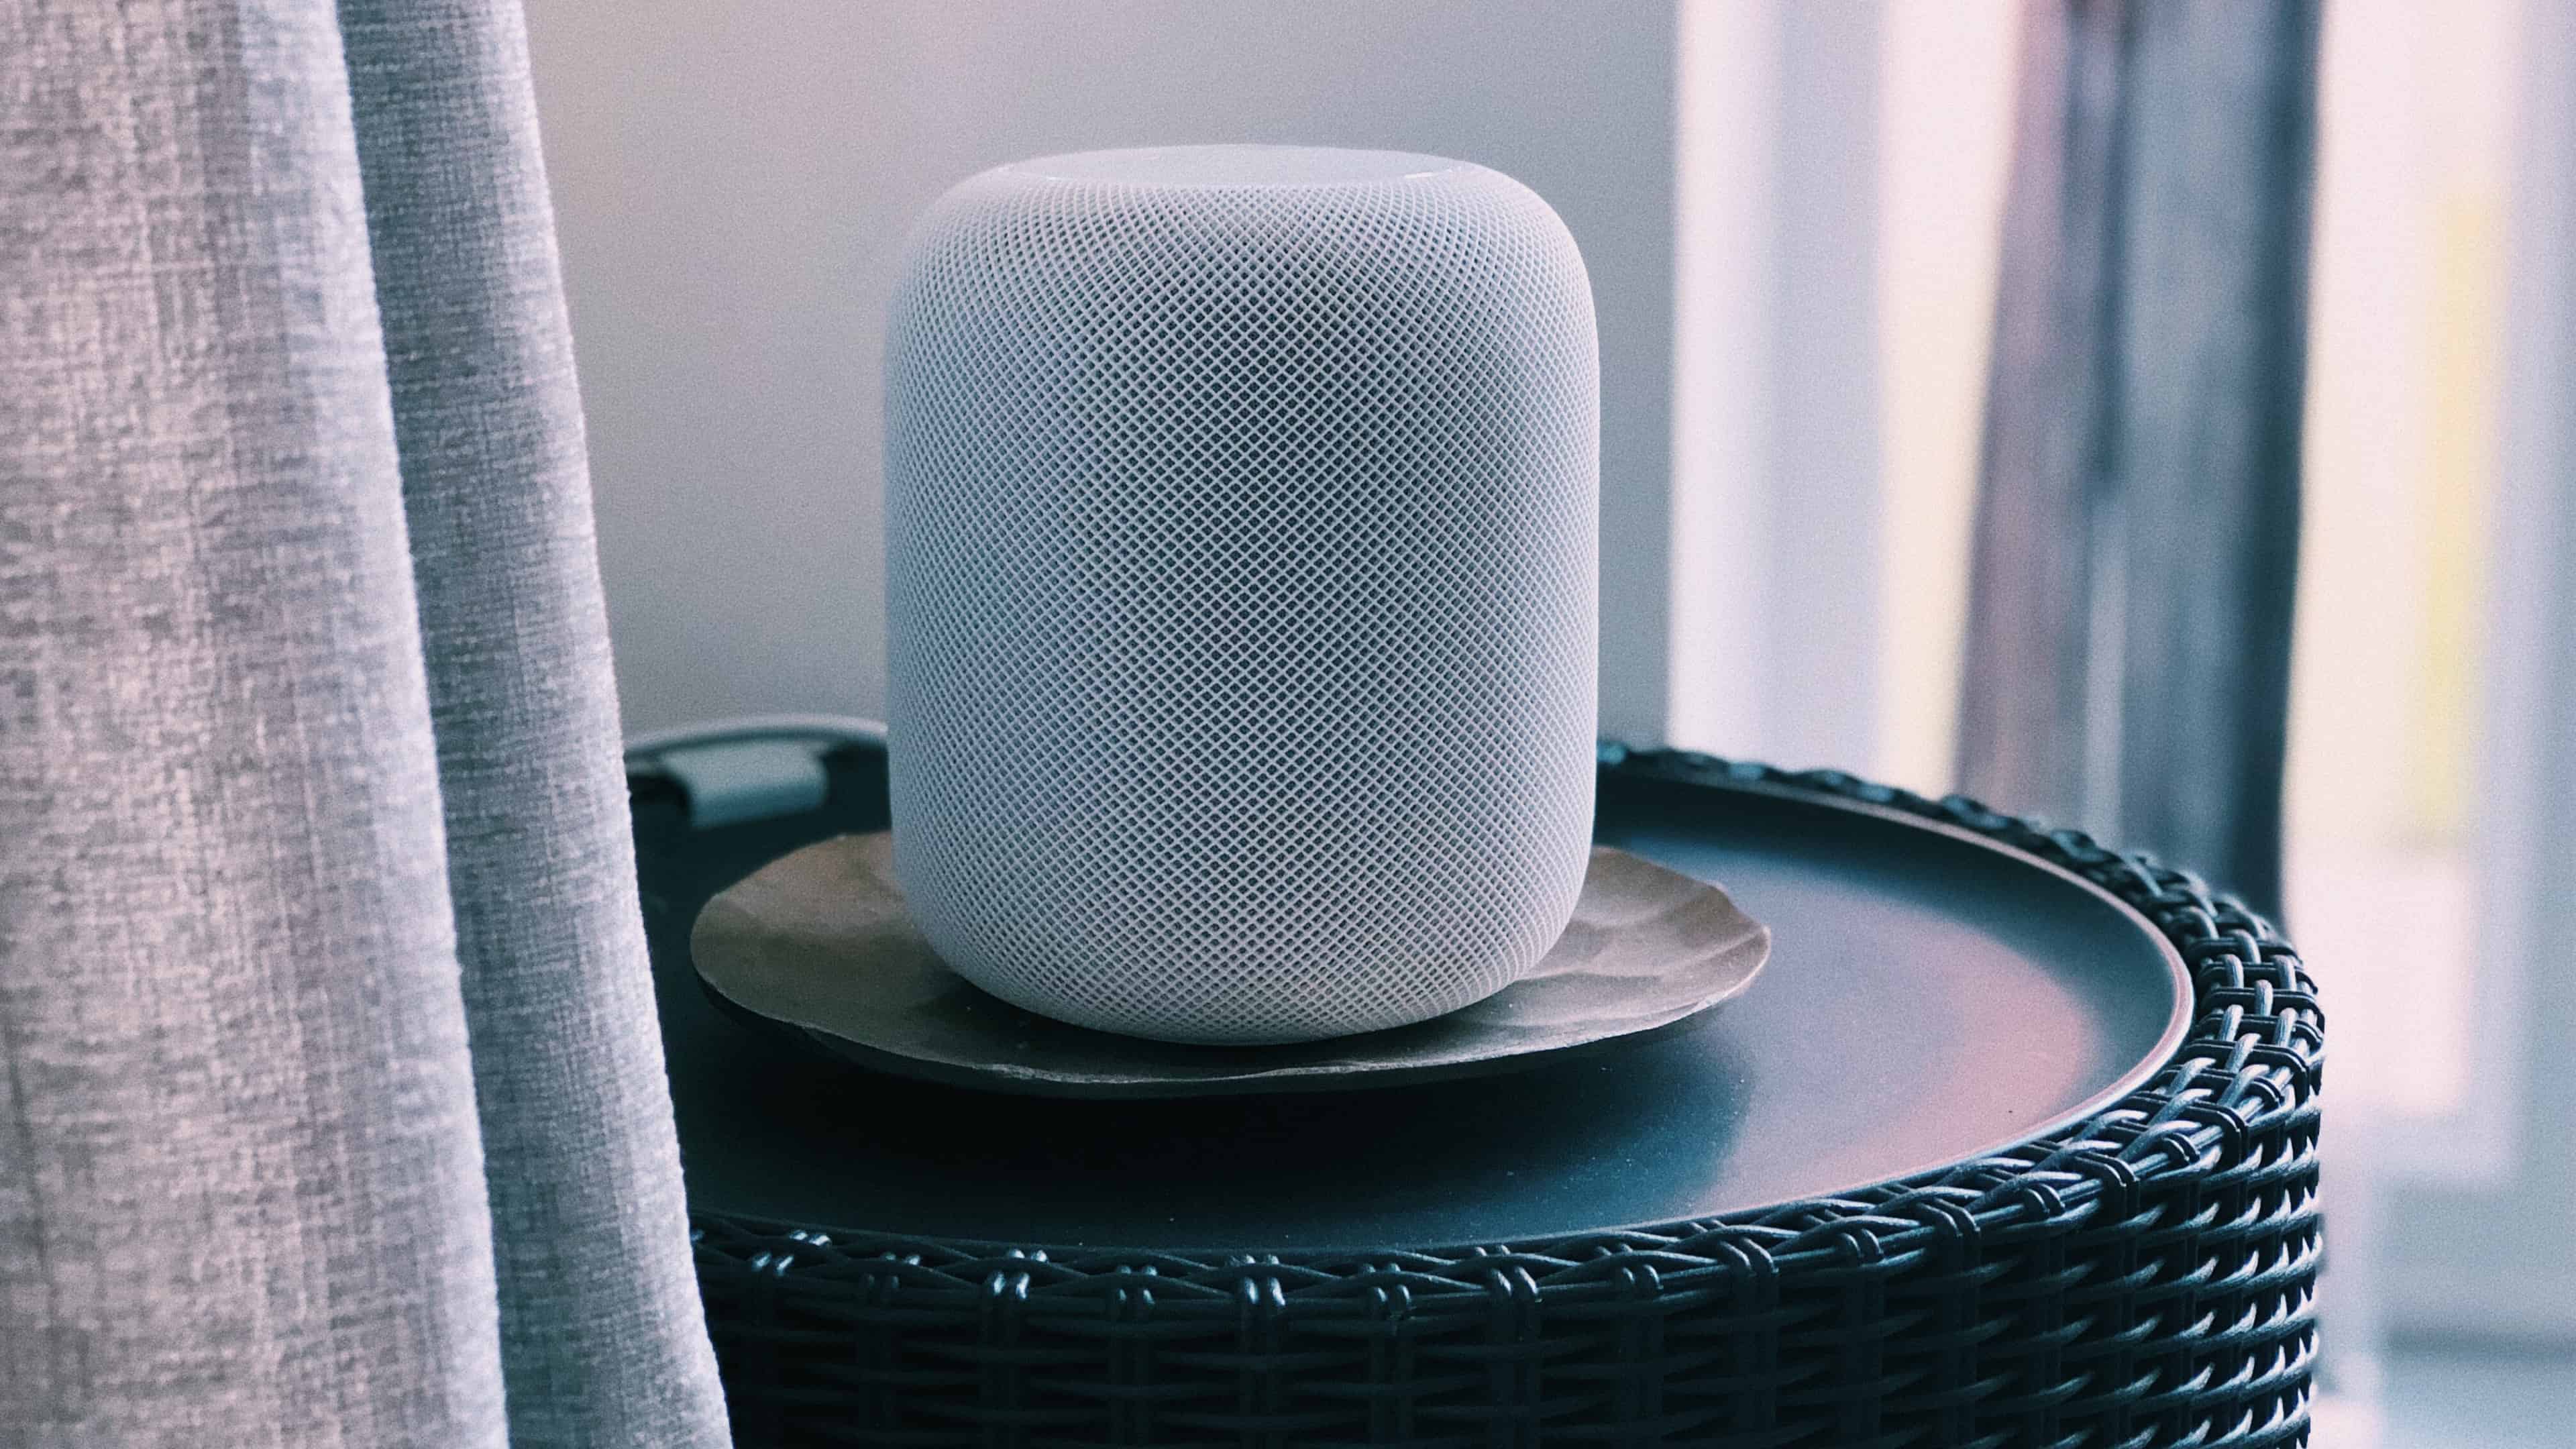 Apple seems to be testing a HomePod with a built-in touchscreen display